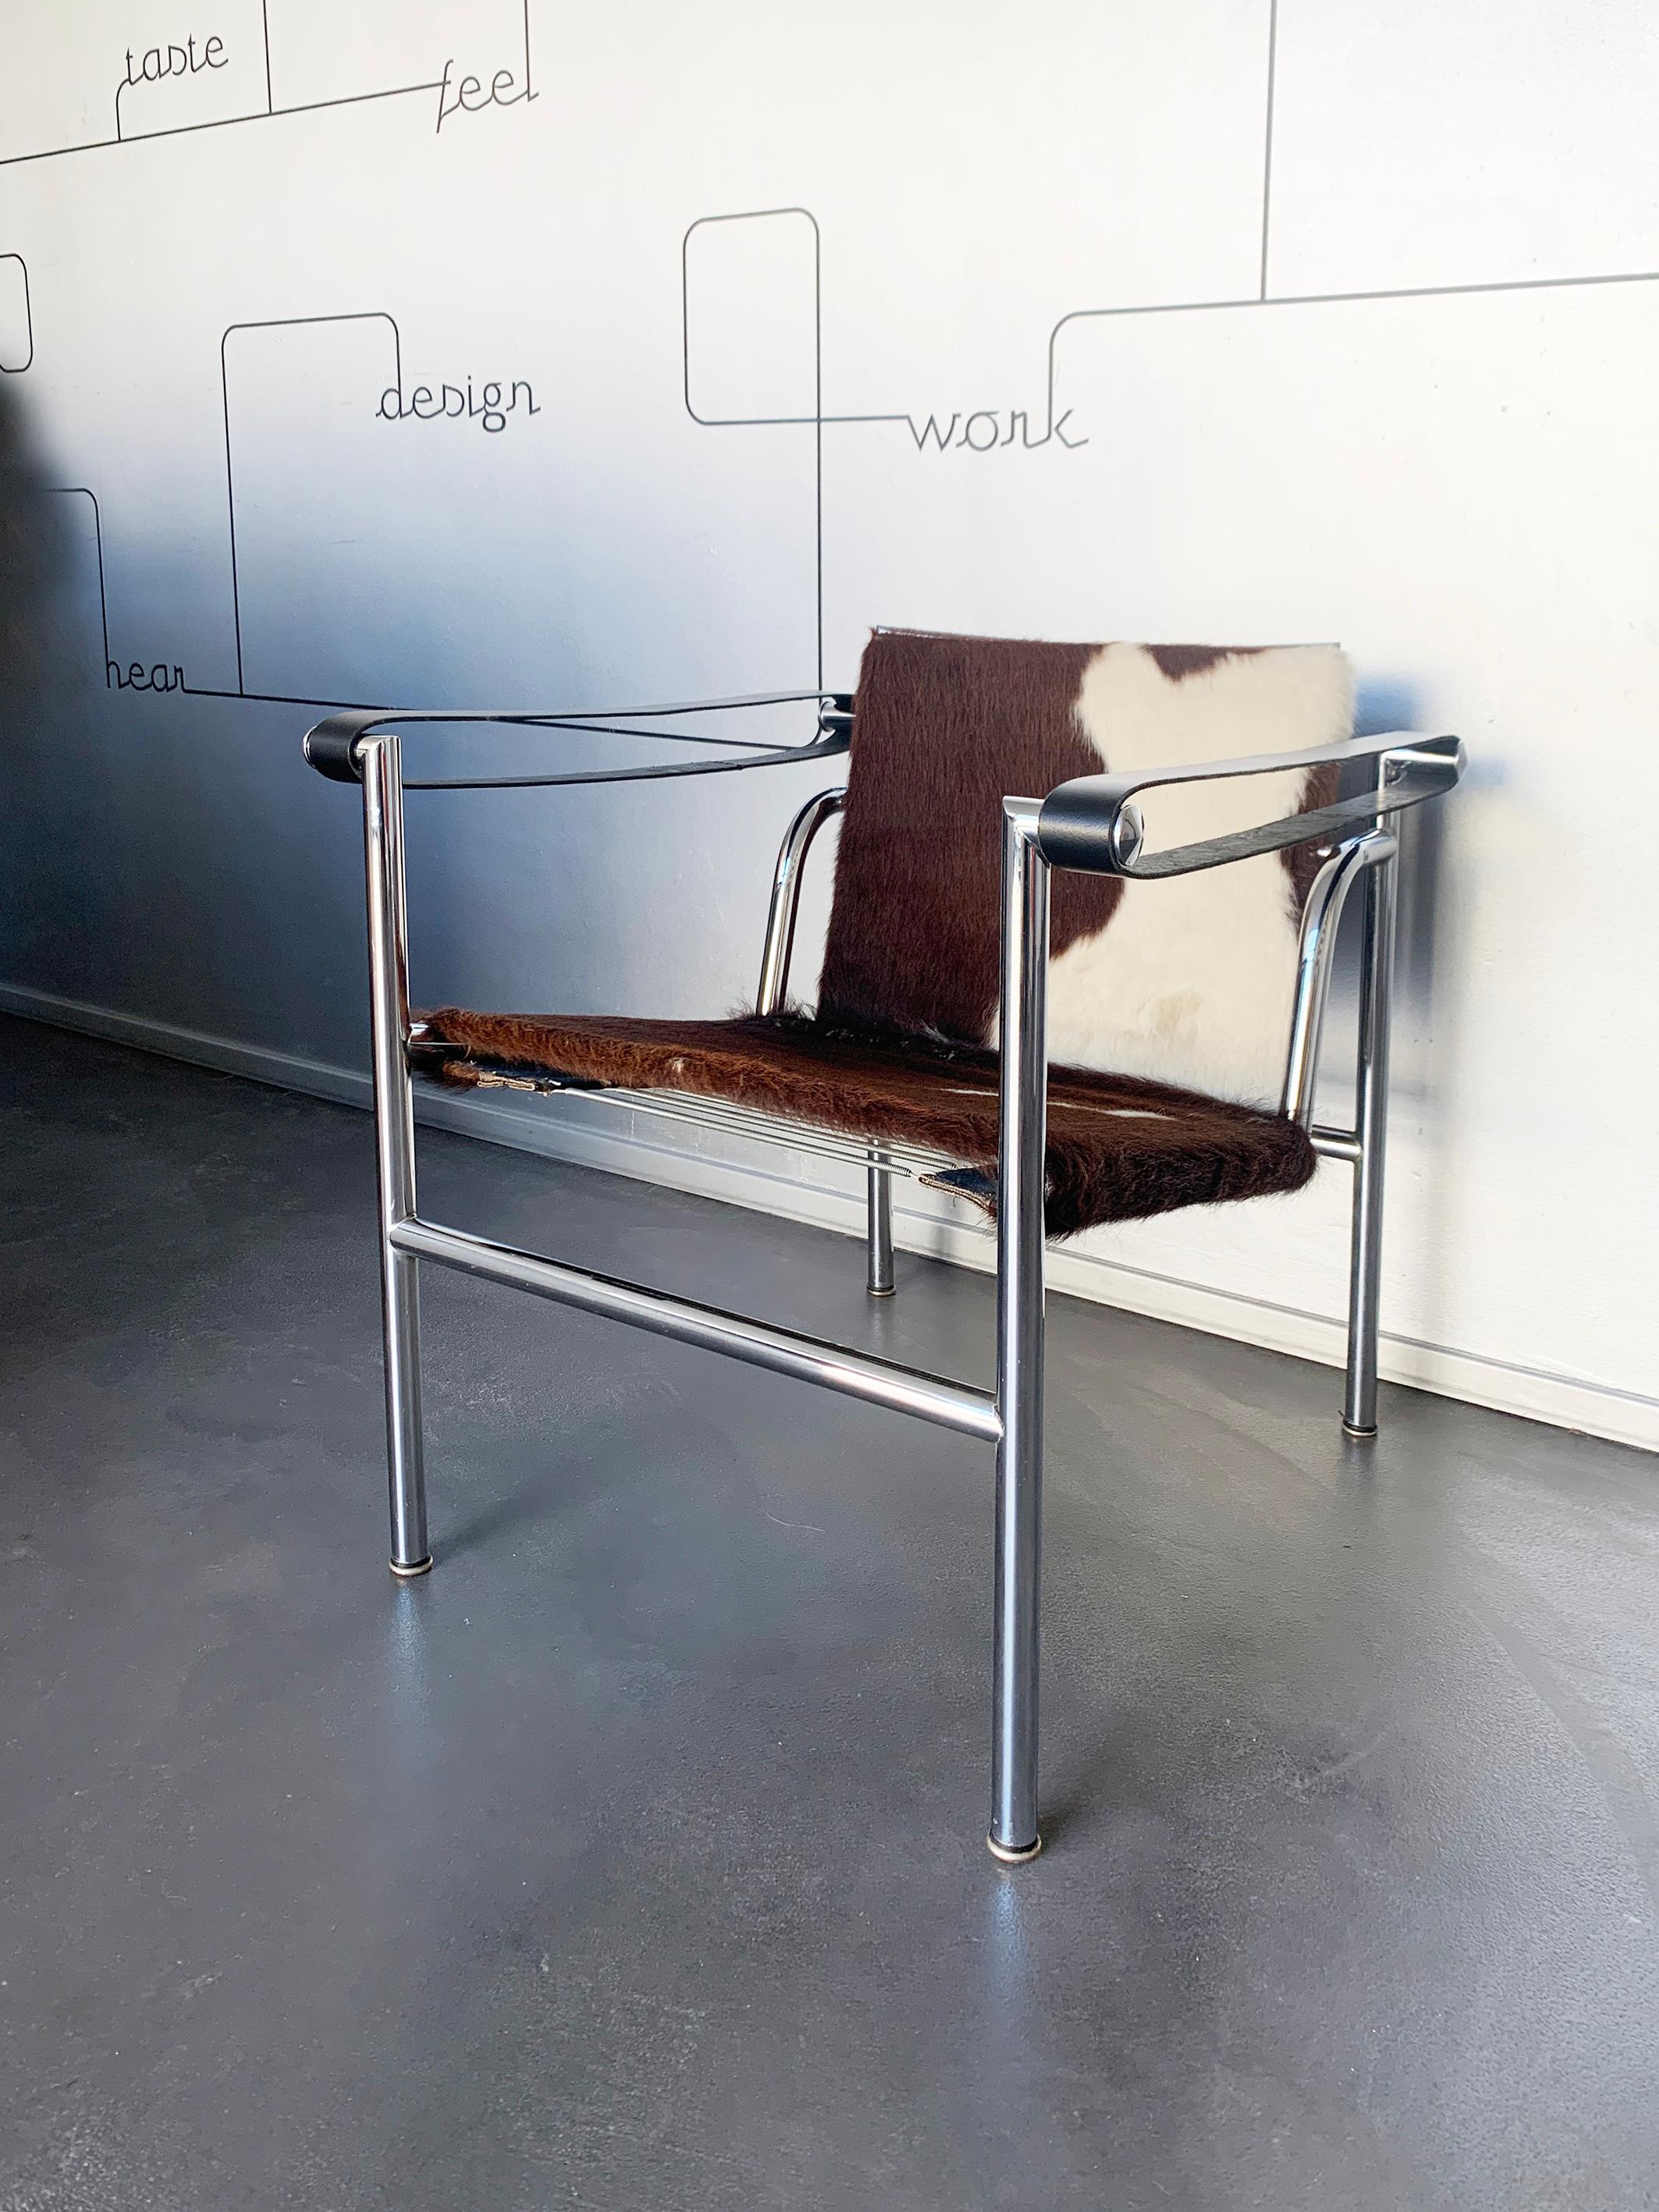 LC1 chair was designed by Le Corbusier, Pierre Jeanneret, and Charlotte Perriand in 1928.

Cassina bought the rights and started to produce these chairs +/-1960. This particular chair is numbered 2724 and must have been produced in the early